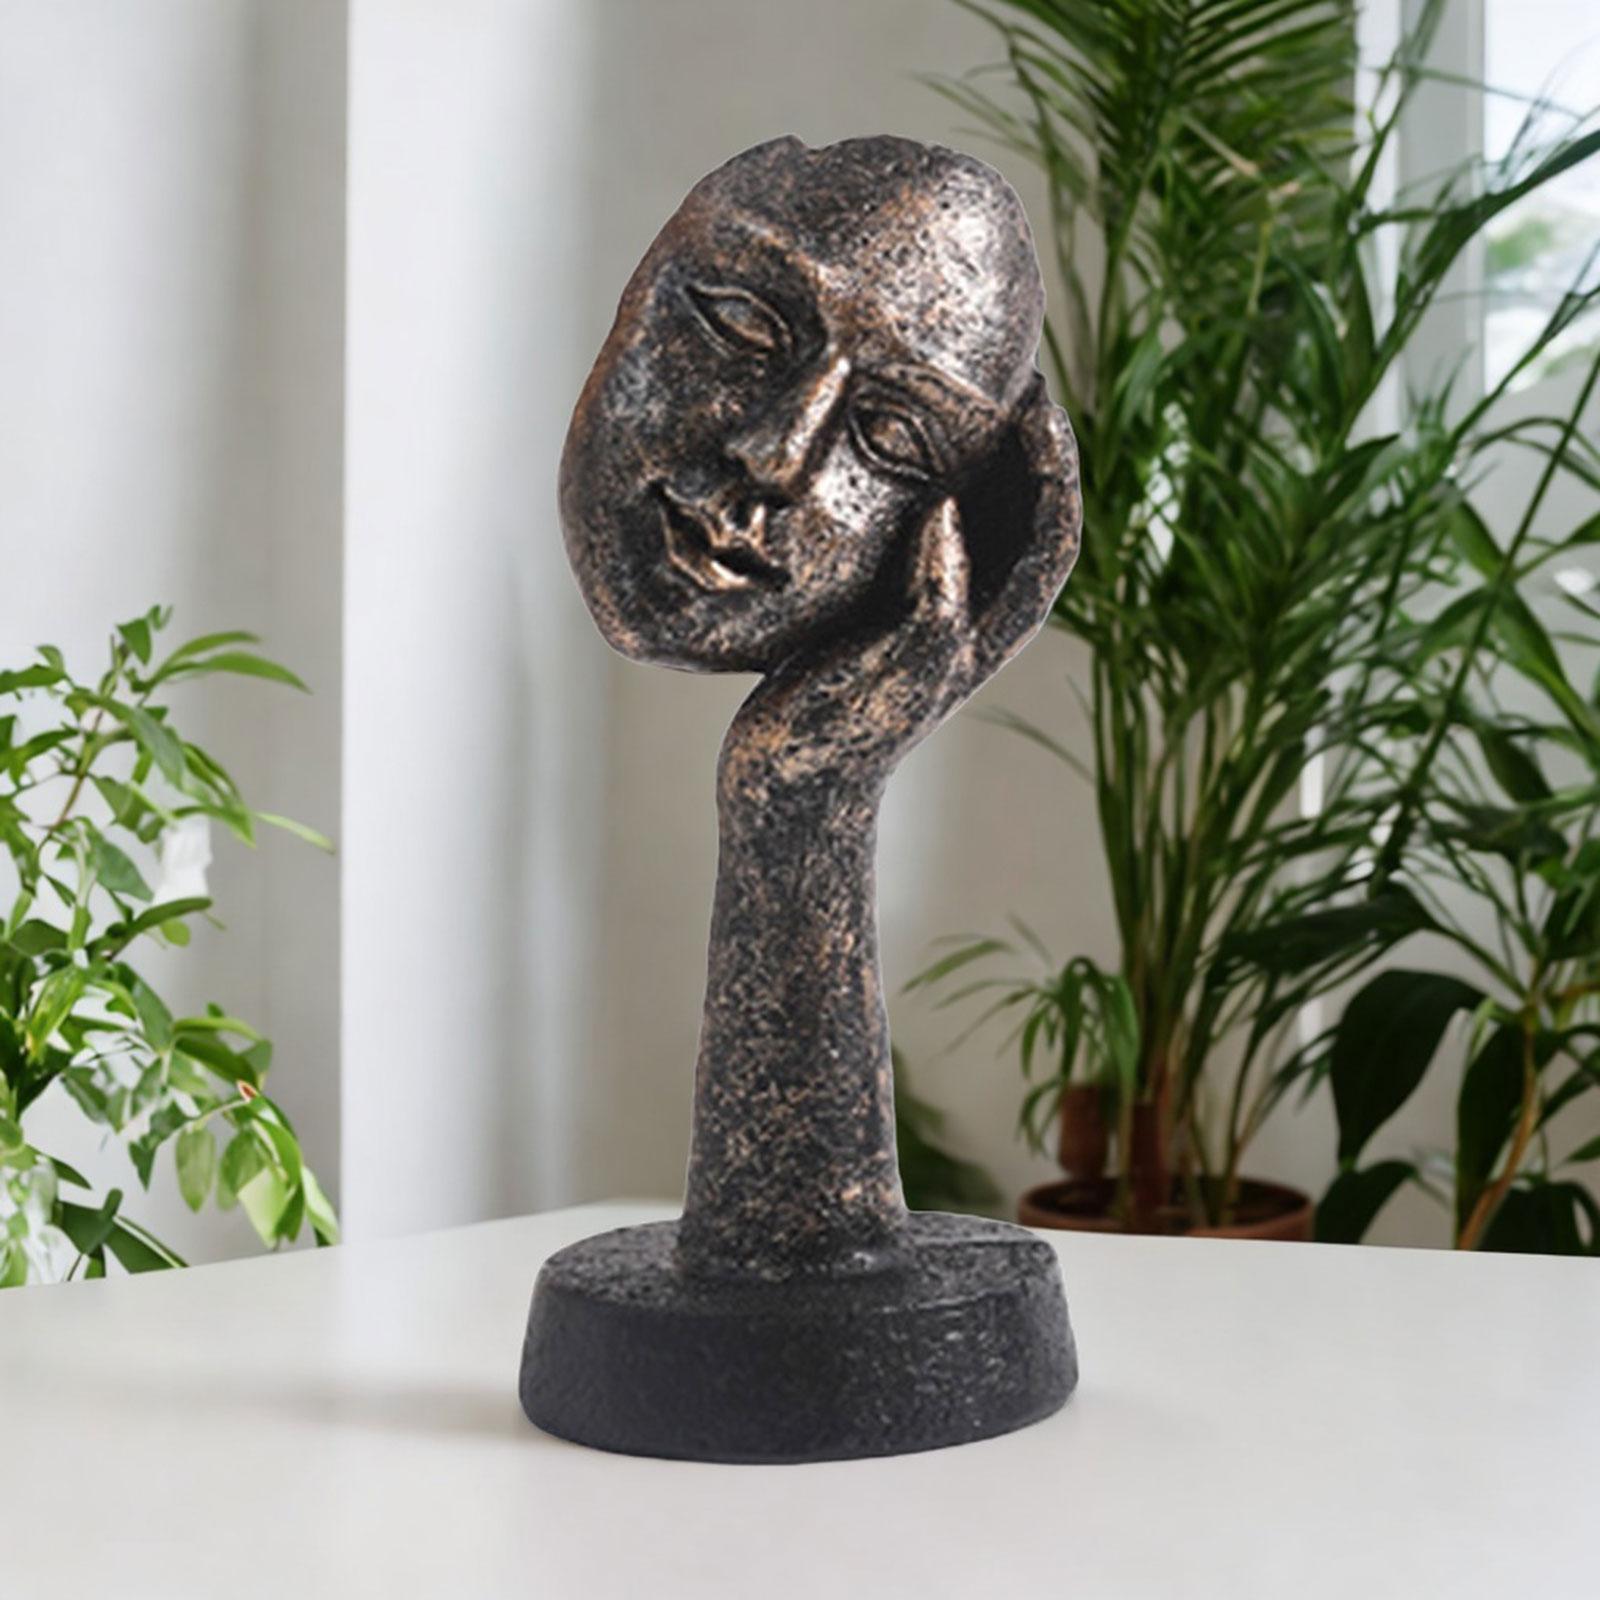 Thinker Statues Face Sculpture for Table Bookshelf Decorative Objects Office 14.5cmx6.5cm